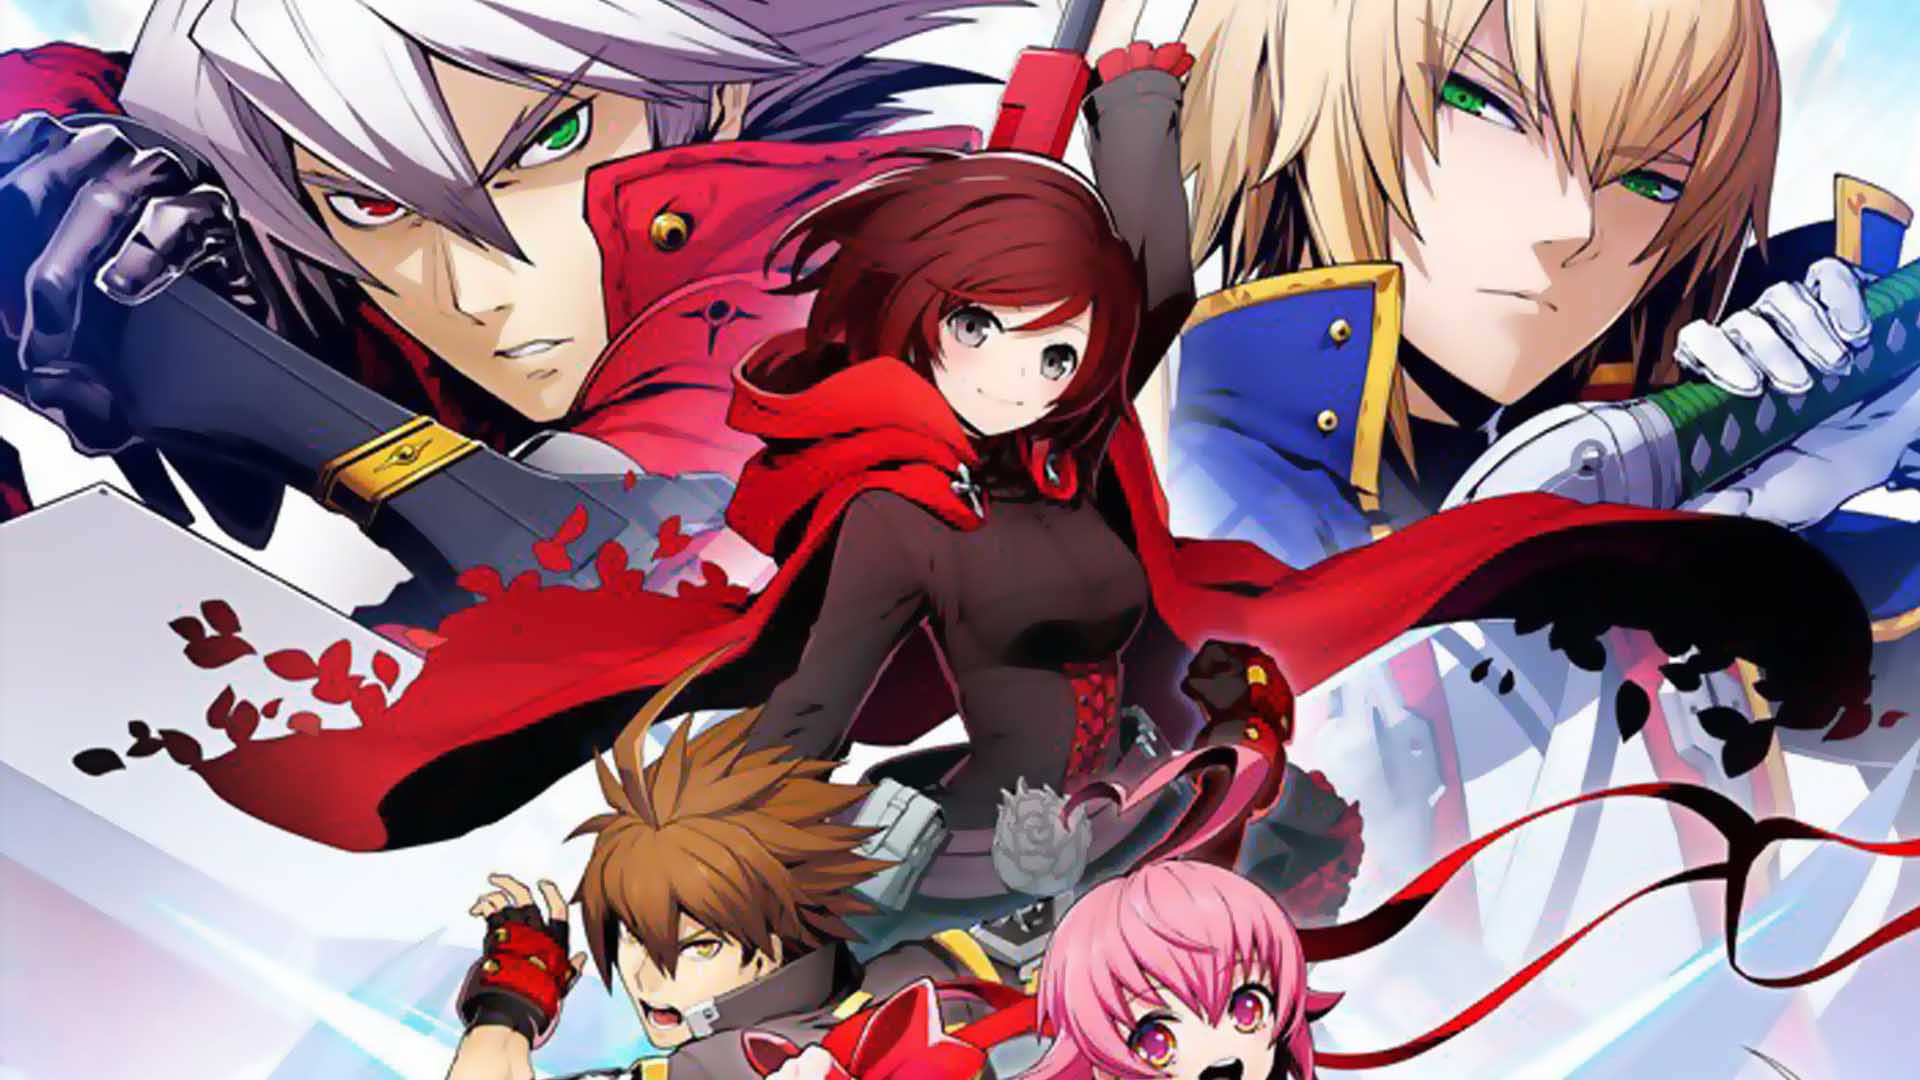 blazblue cross tag battle reveals next add on characters expanding to feature arcana heart nintendo wire blazblue cross tag battle reveals next